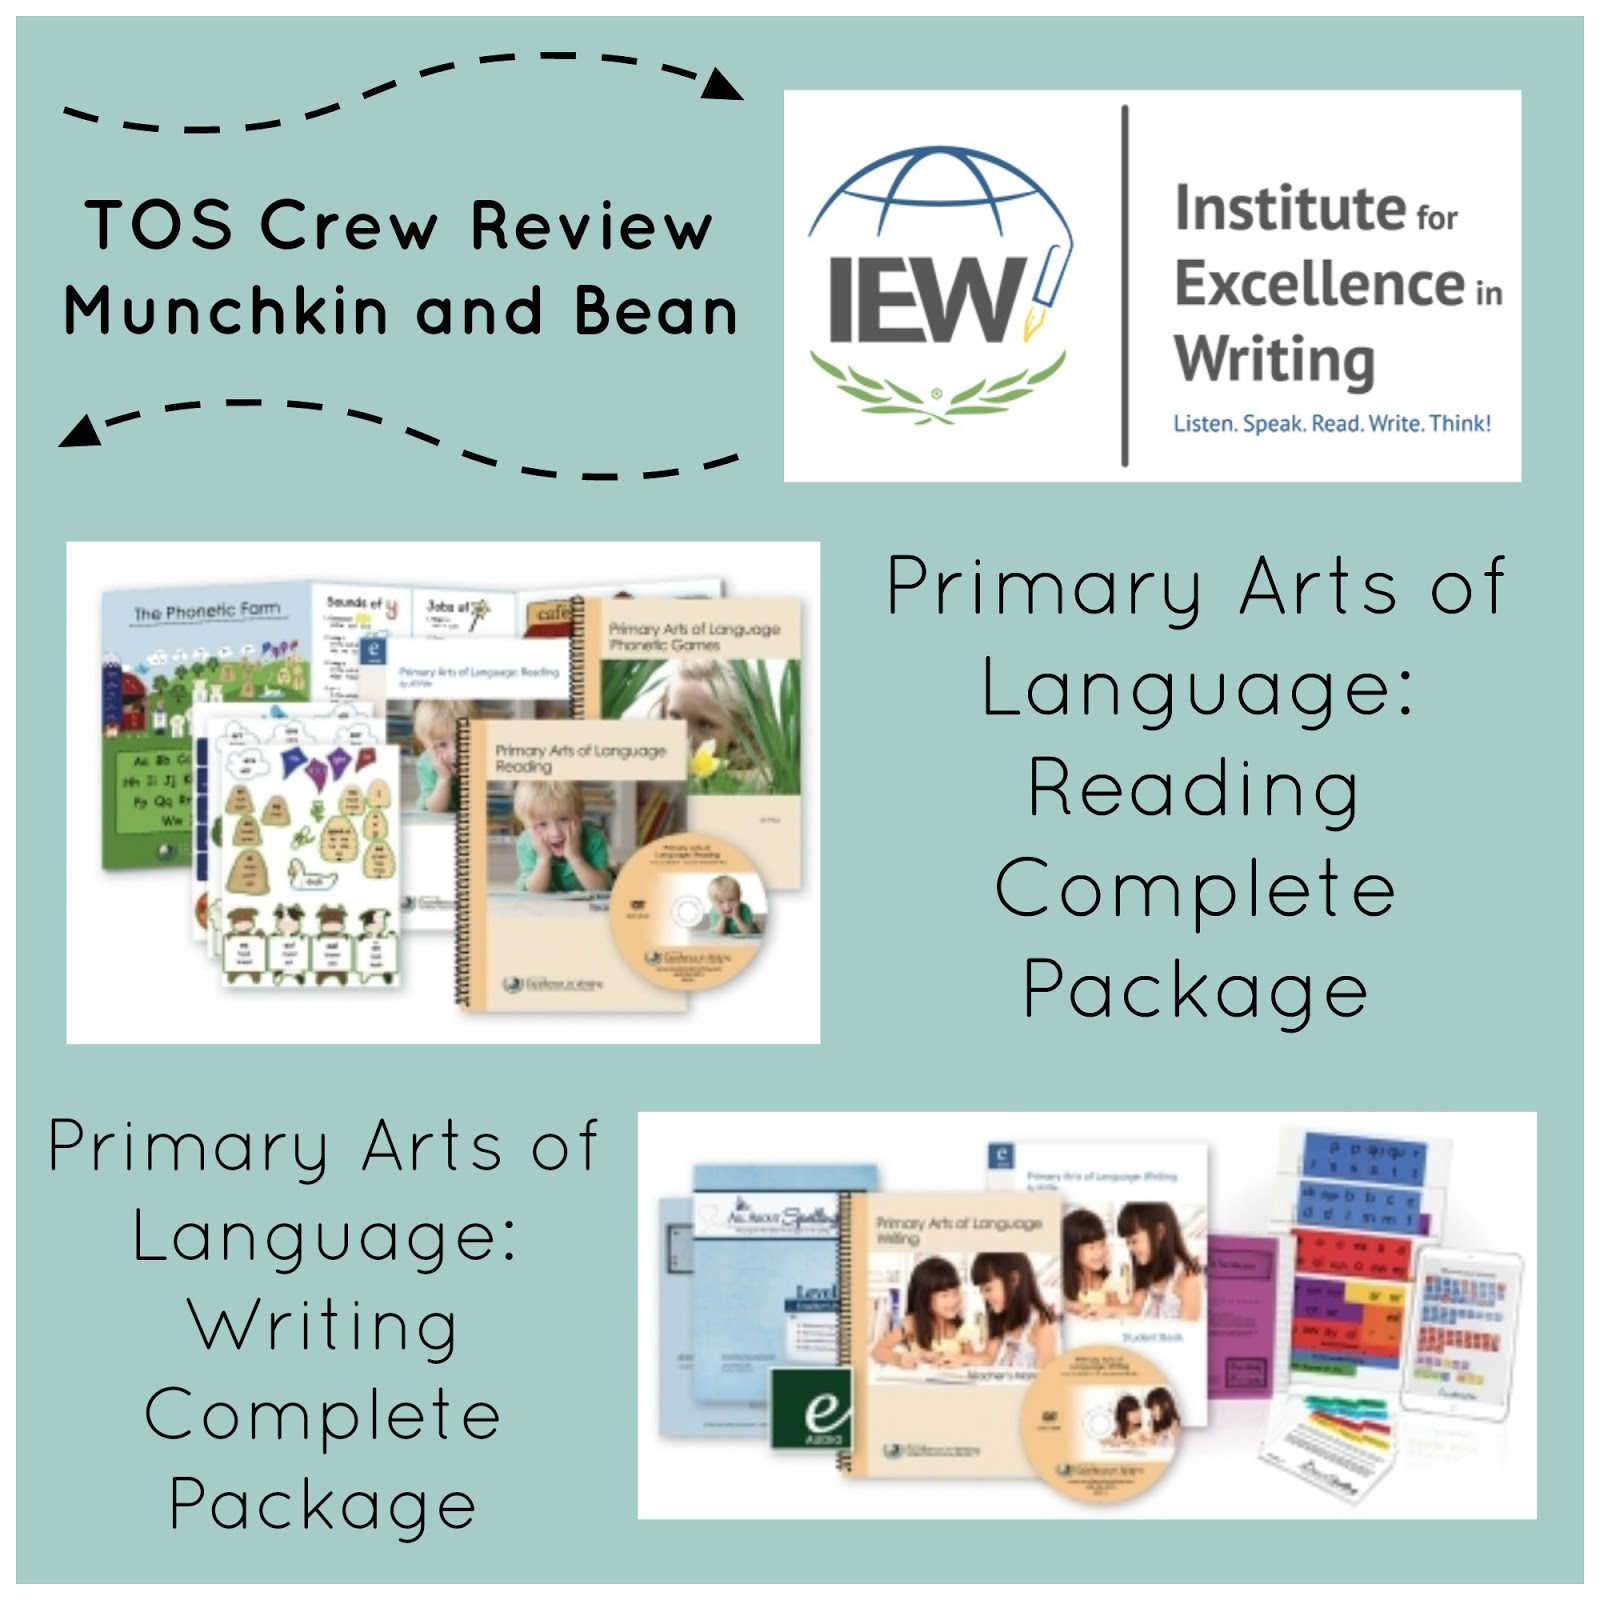 Munchkin and Bean: Institute for Excellence in Writing Review